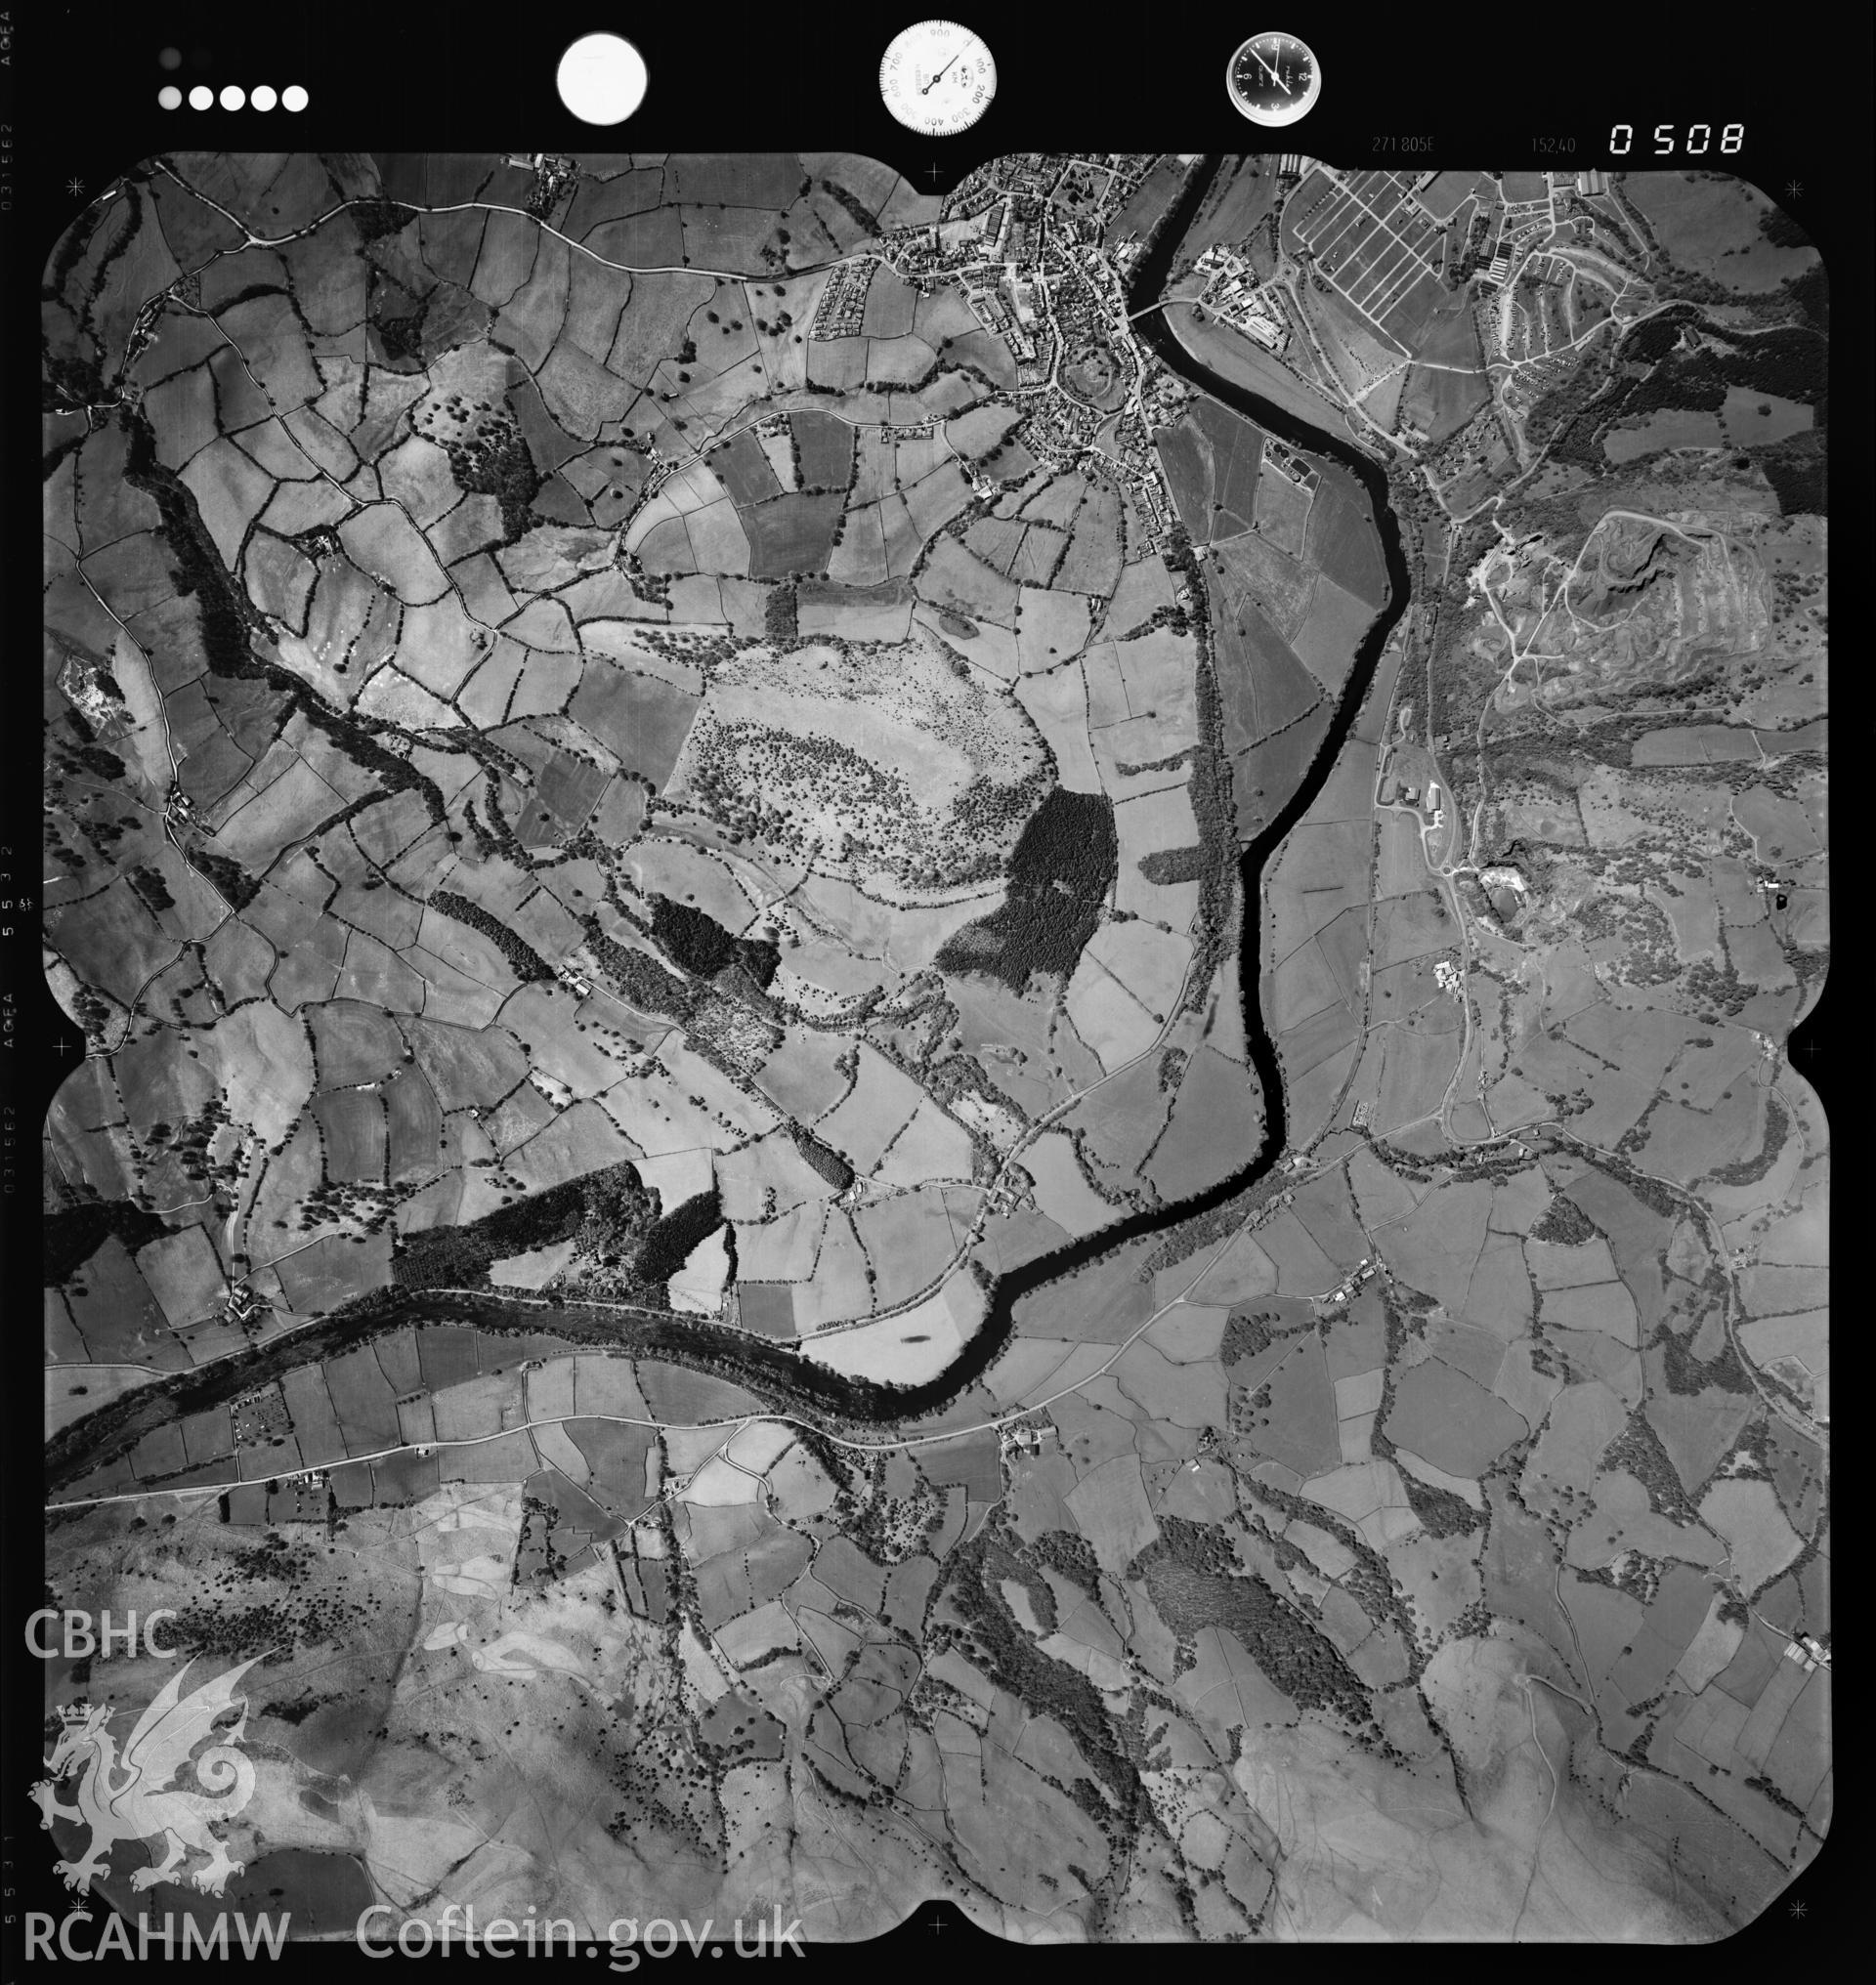 Digital copy of an aerial photograph showing area around Builth Wells SO0550, taken by Ordnance Survey, 2000.